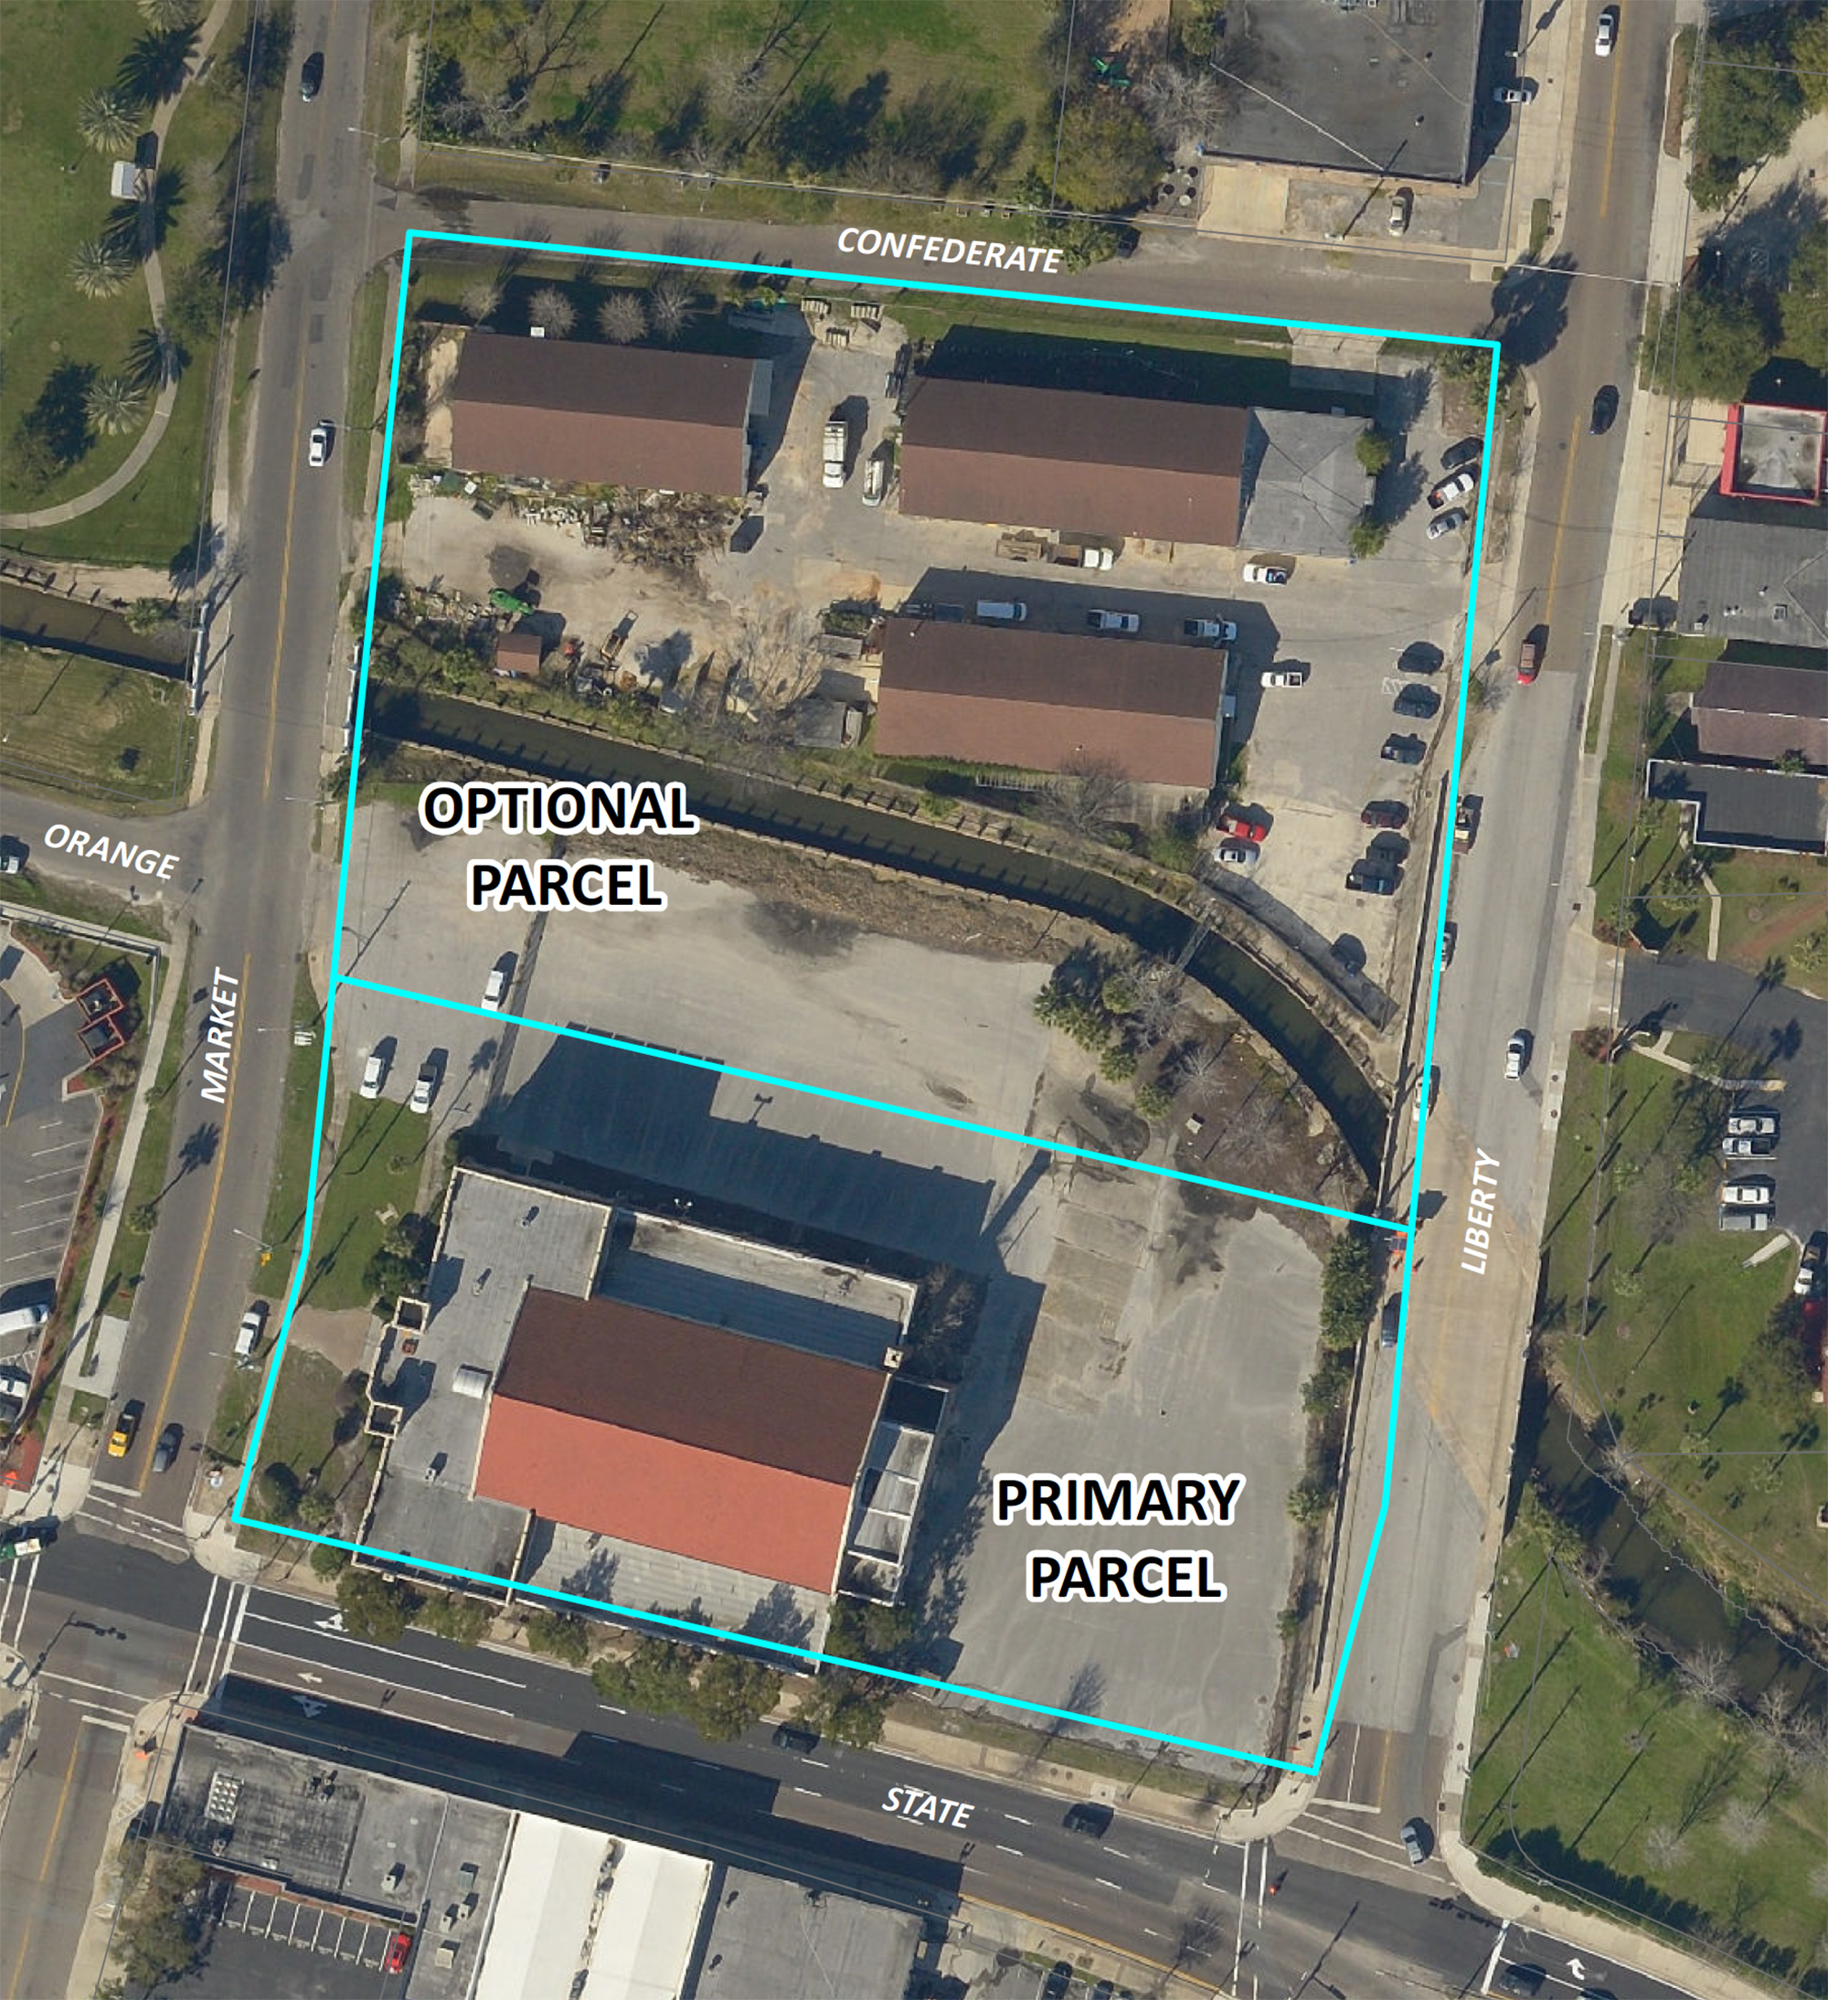 The city is offering the armory site and an adjoining property for development.